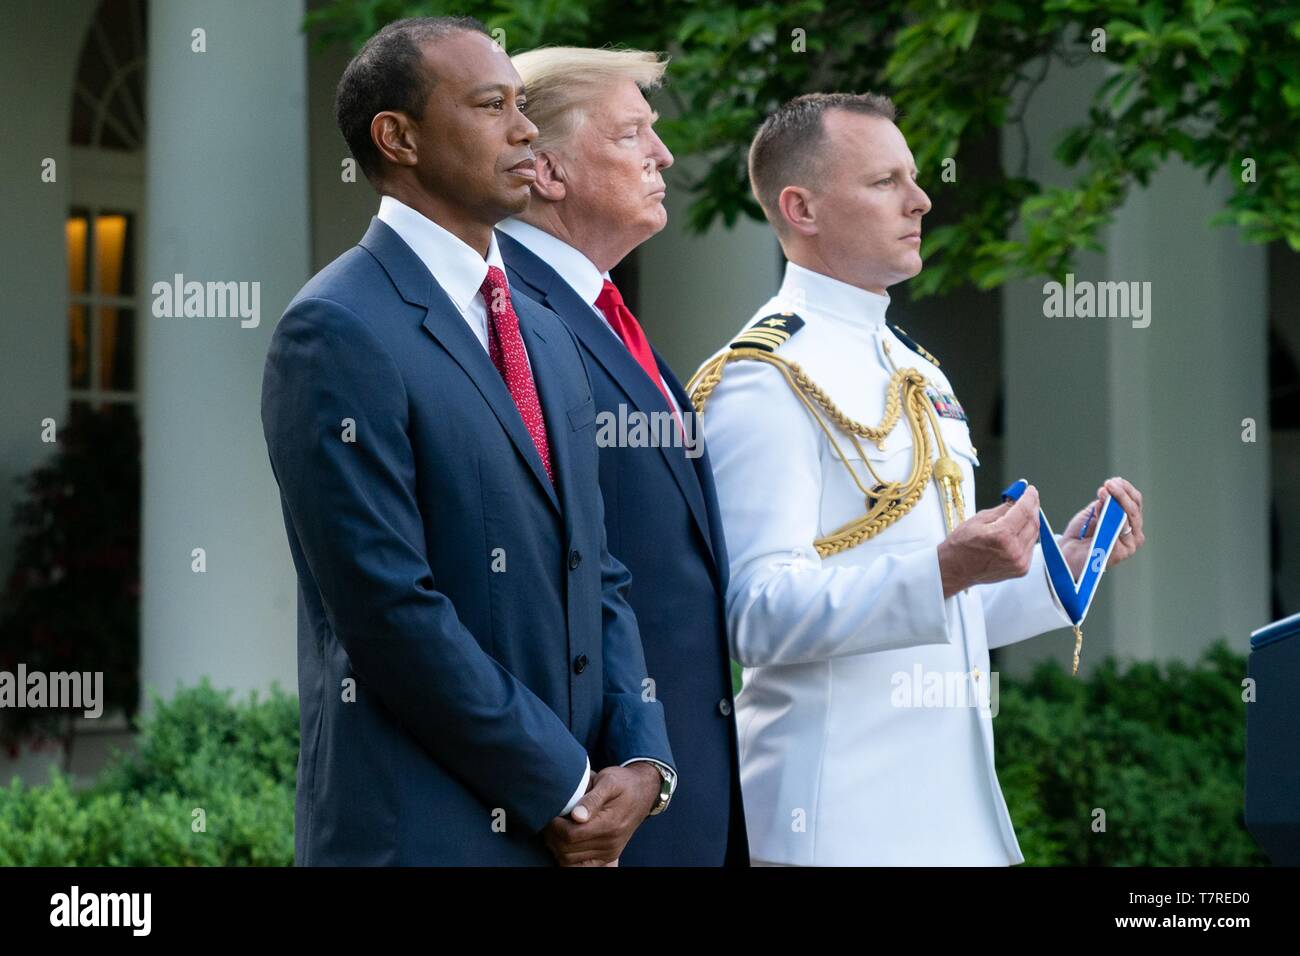 U.S President Donald Trump stands with golfer Tiger Woods during the presentation of the Presidential Medal of Freedom in the Rose Garden of the White House May 6, 2019 in Washington, DC. Stock Photo